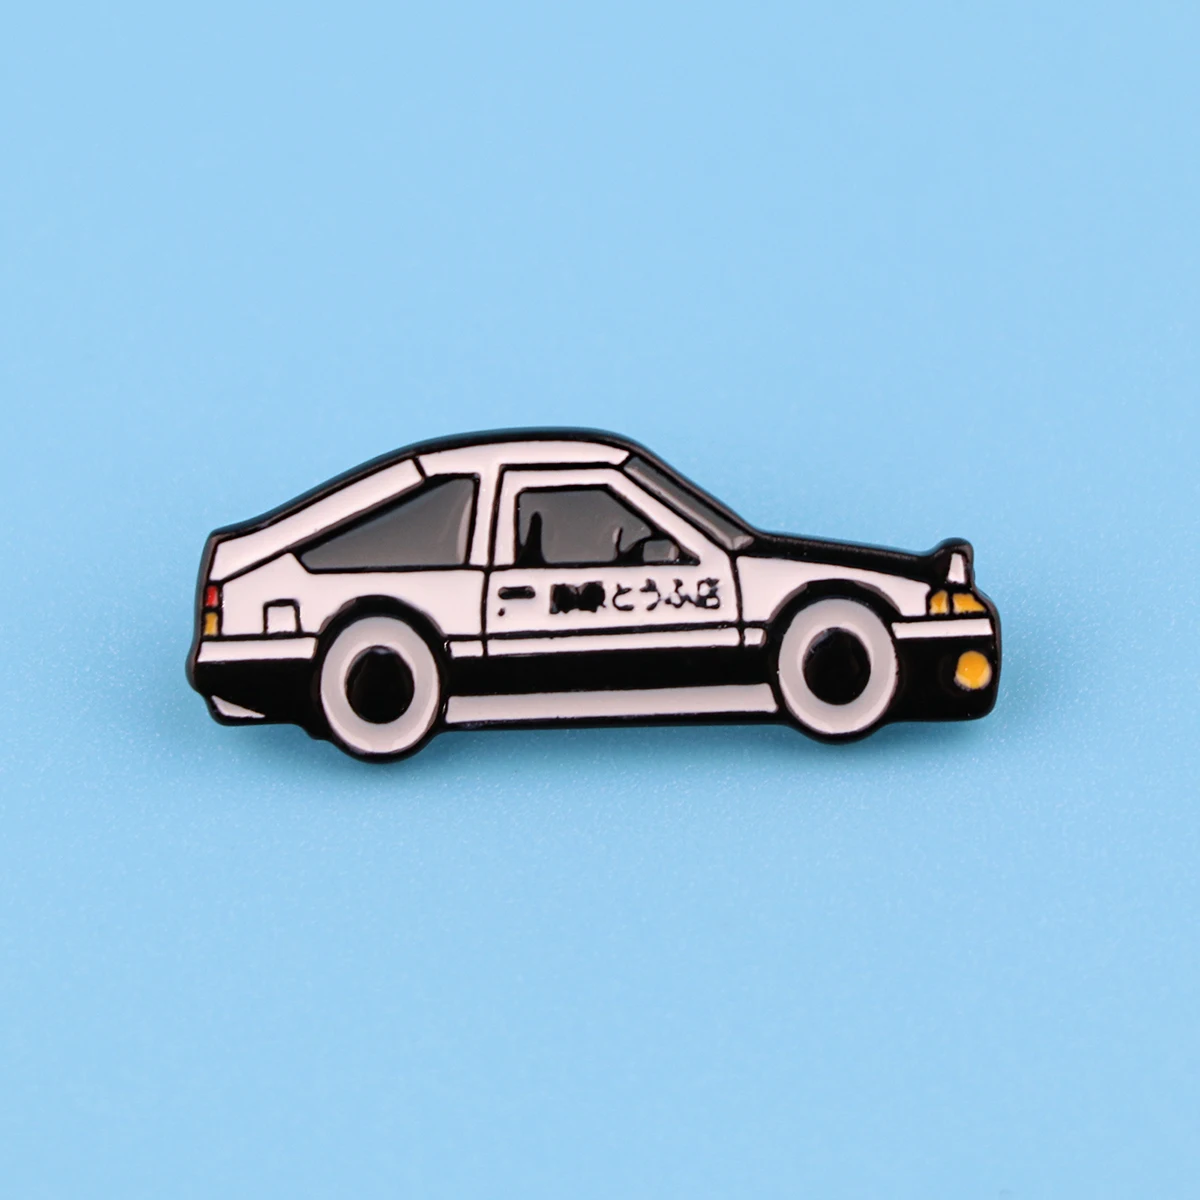 Initial D Japanese Anime Enamel Pins Lapel Pins for Backpack Brooches for Clothing Cool Briefcase Badges Jewelry Accessories images - 6